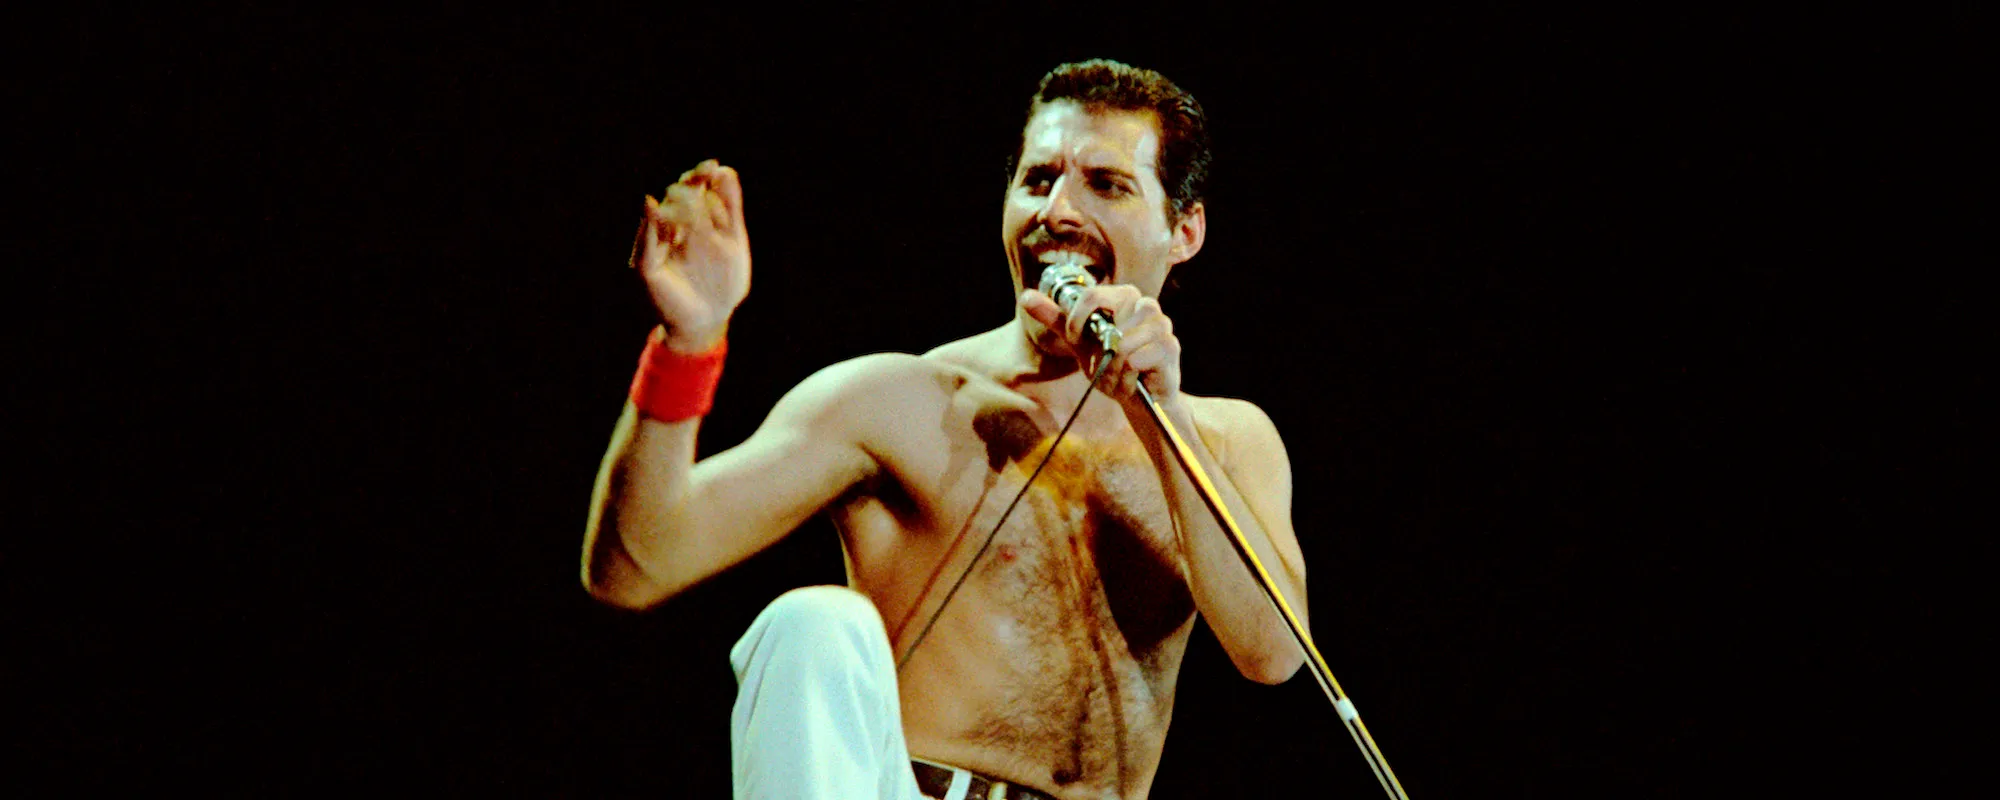 Watch: Queen’s 1981 Montreal Concert Remastered; See Rare Photographs of the Band Taken by Security Guard